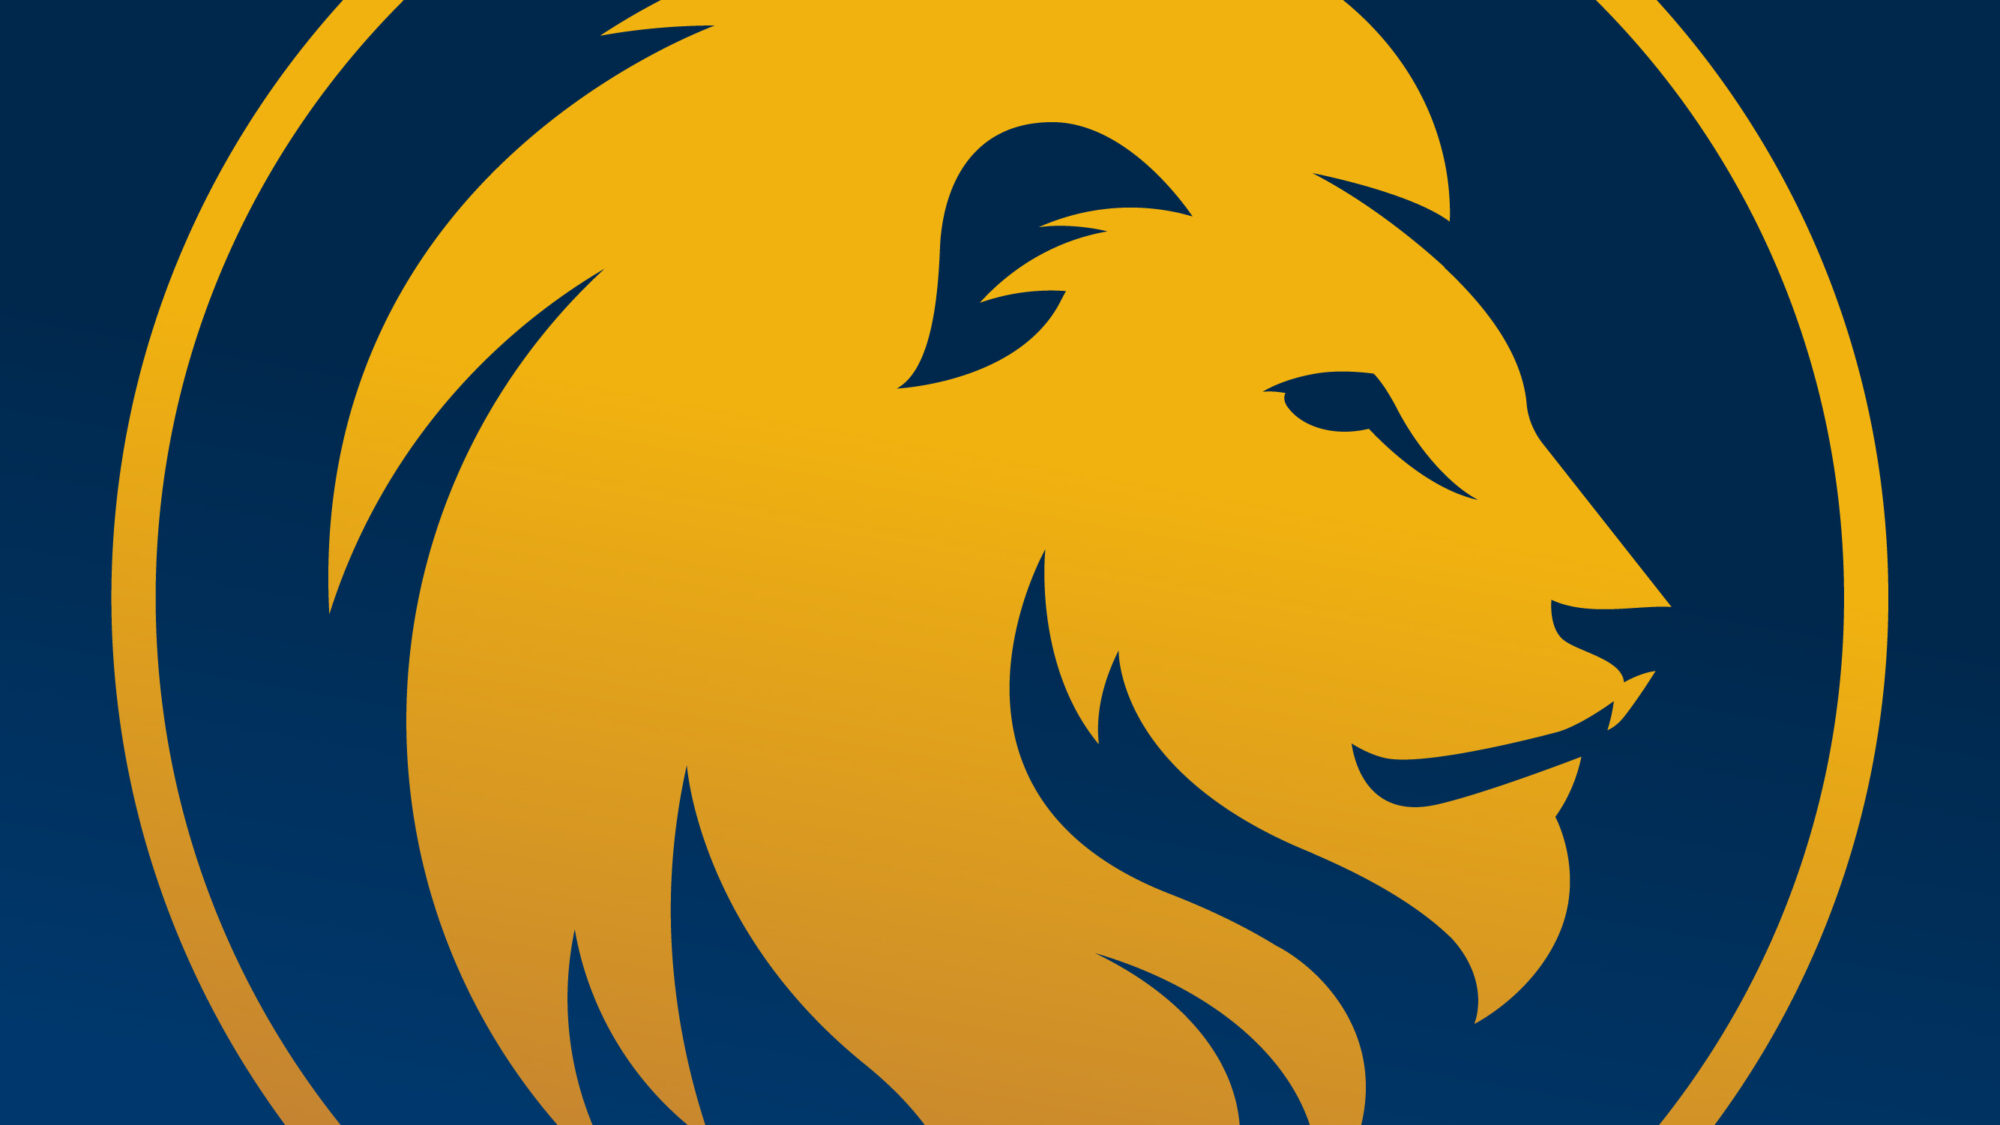 Gold lion Head icon with blue background.